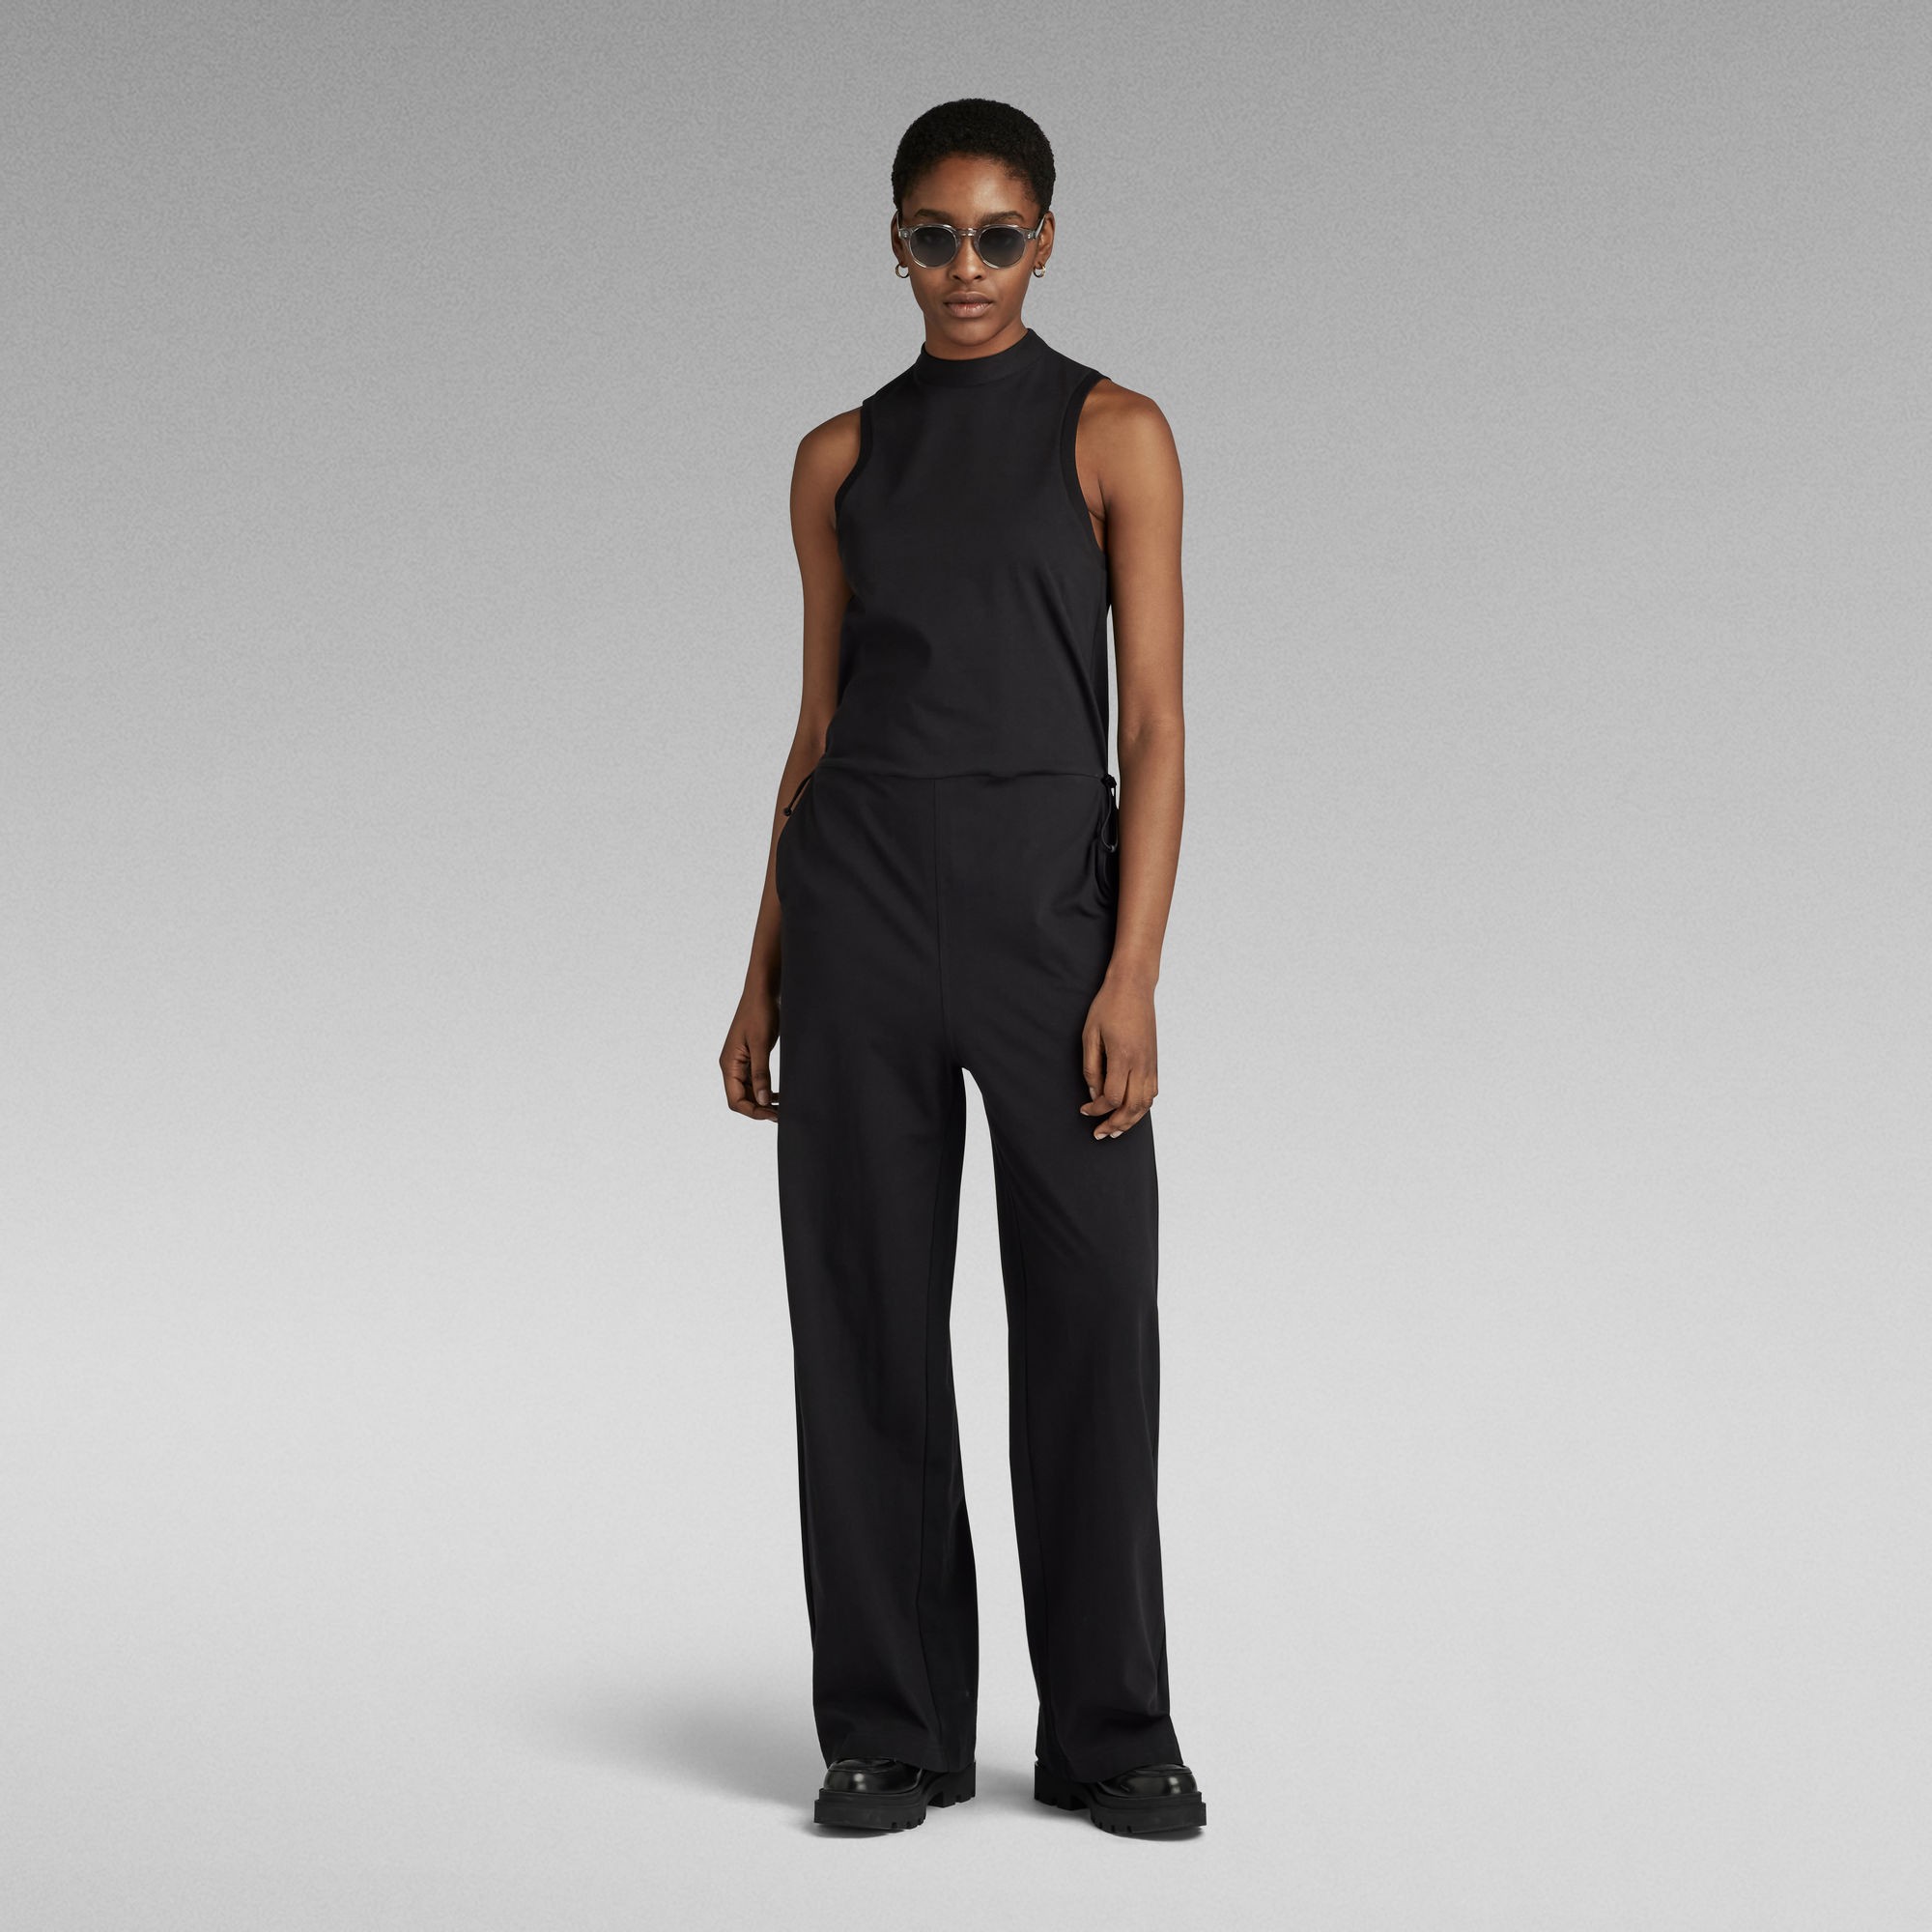 Open Back Jumpsuit Best Deals and Price History at JoinHoney.com | Honey